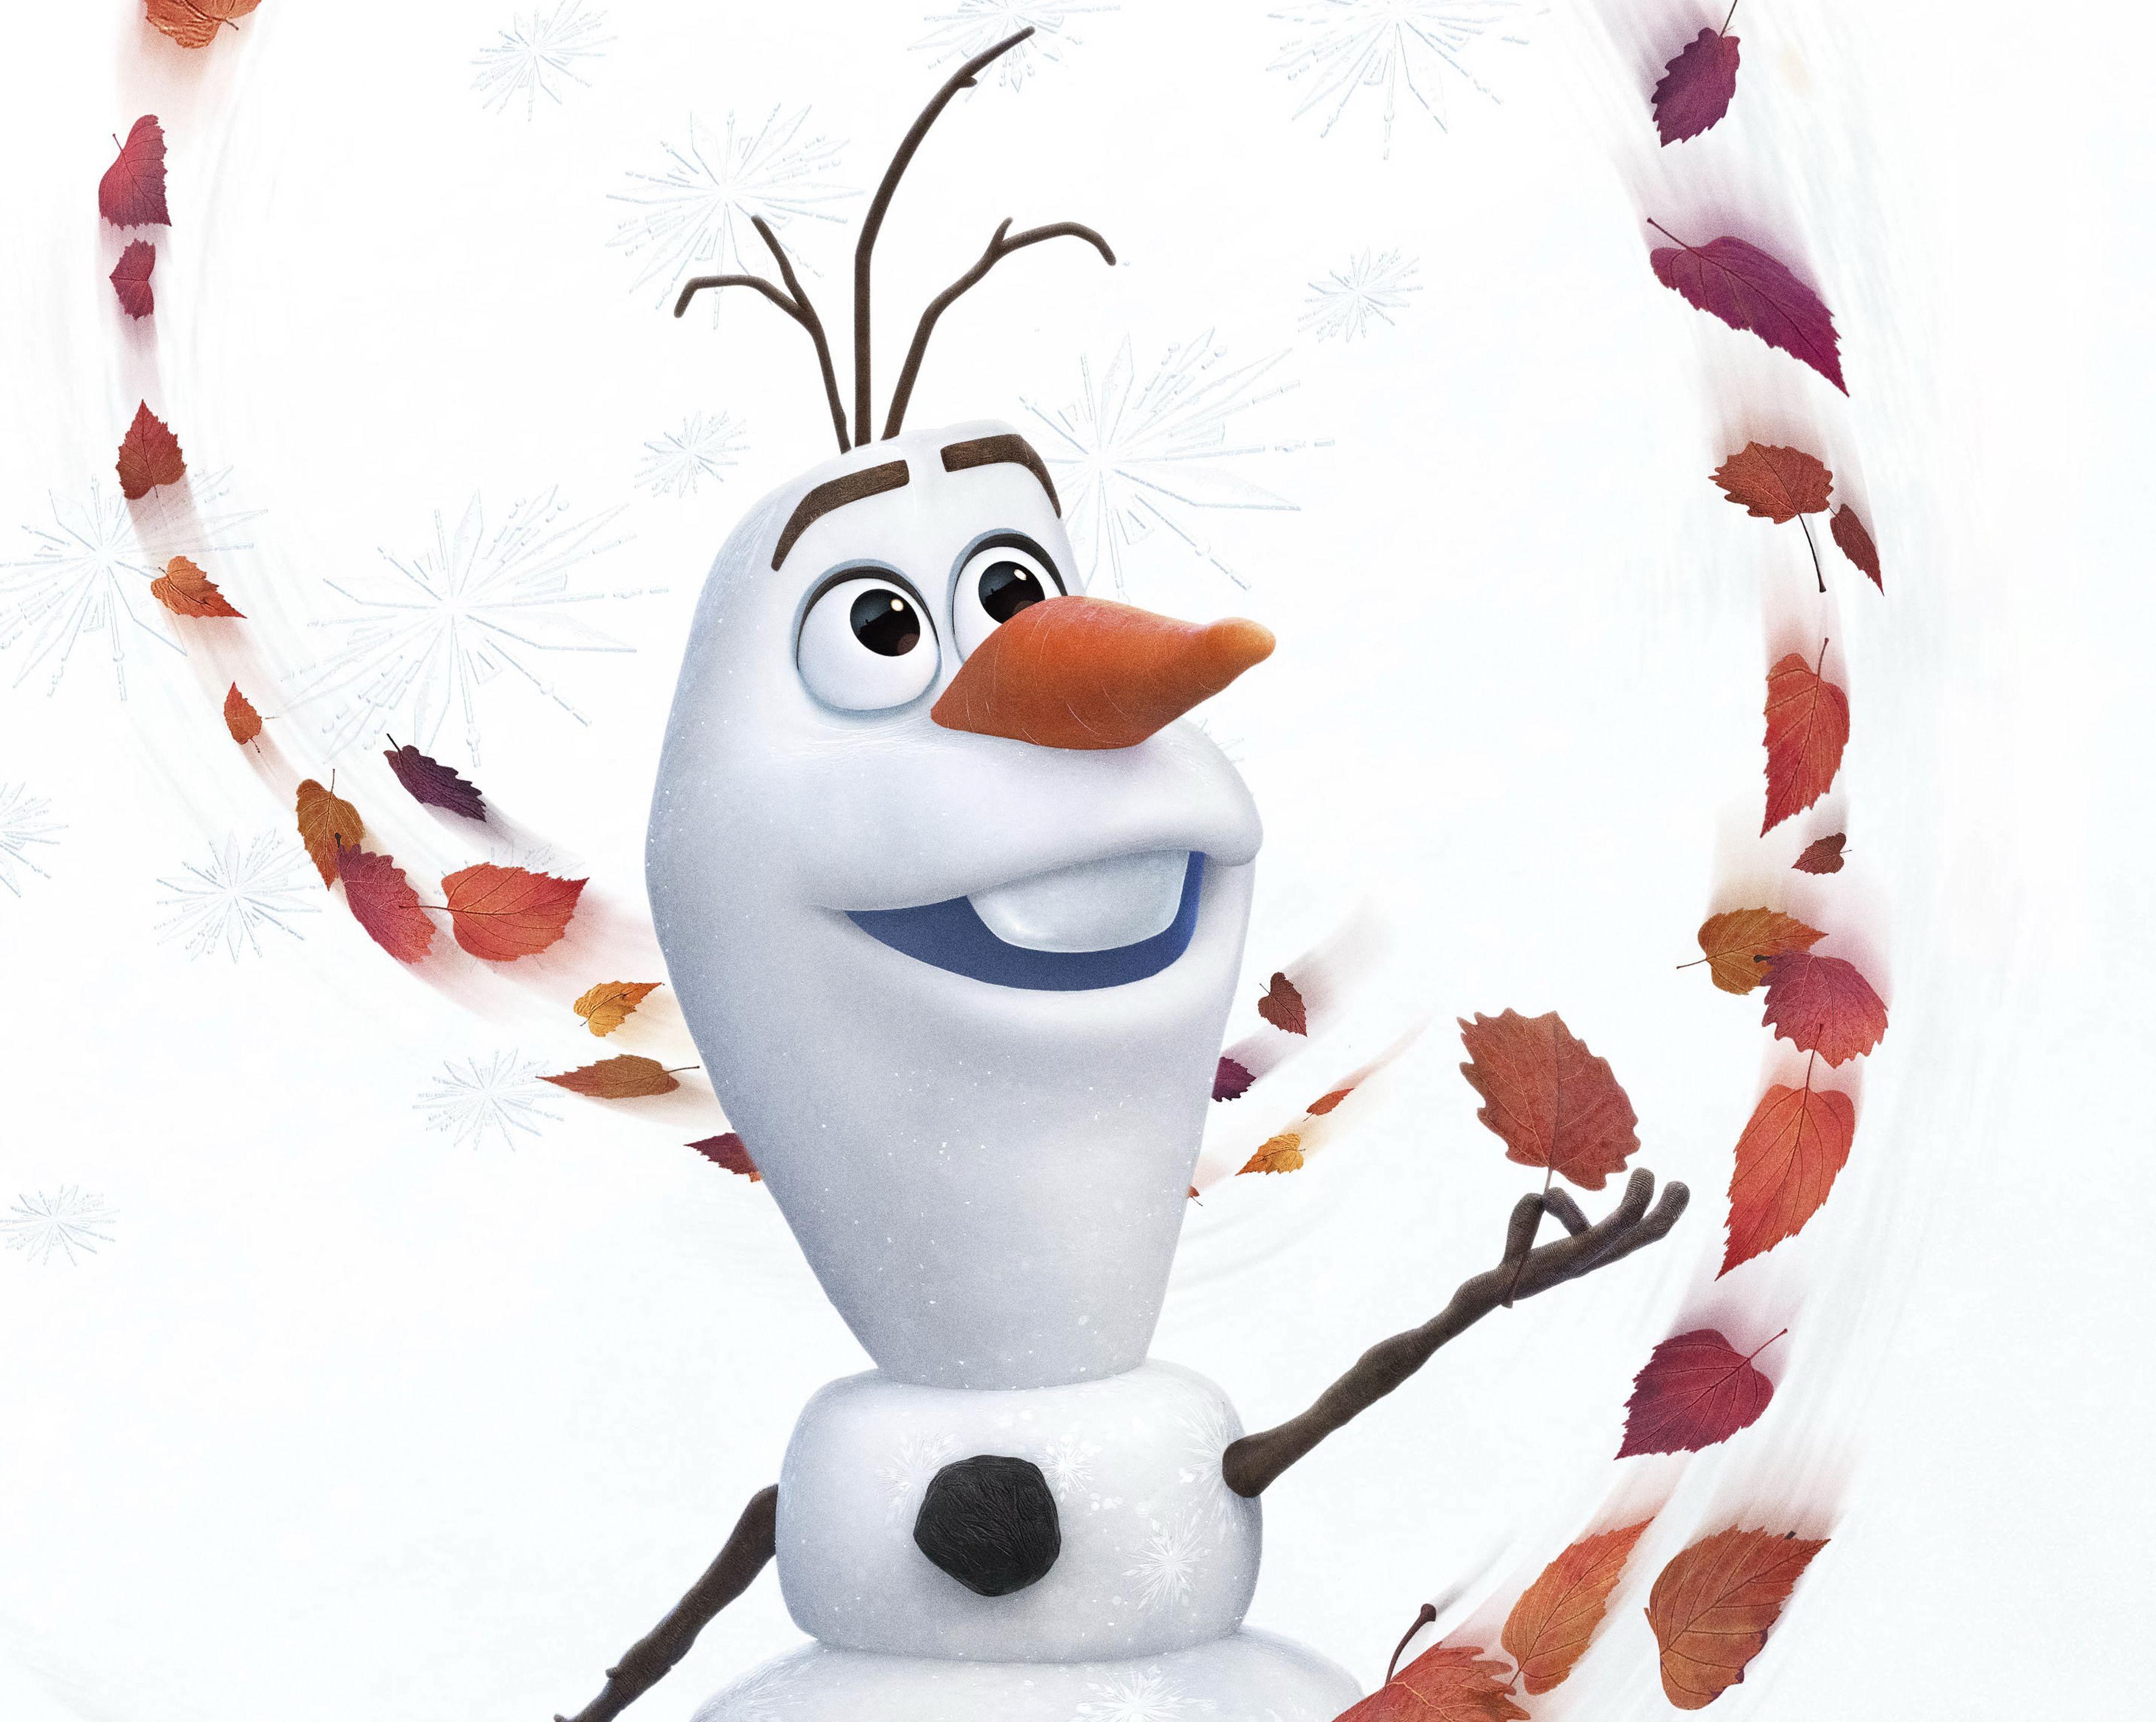 Frozen for android download